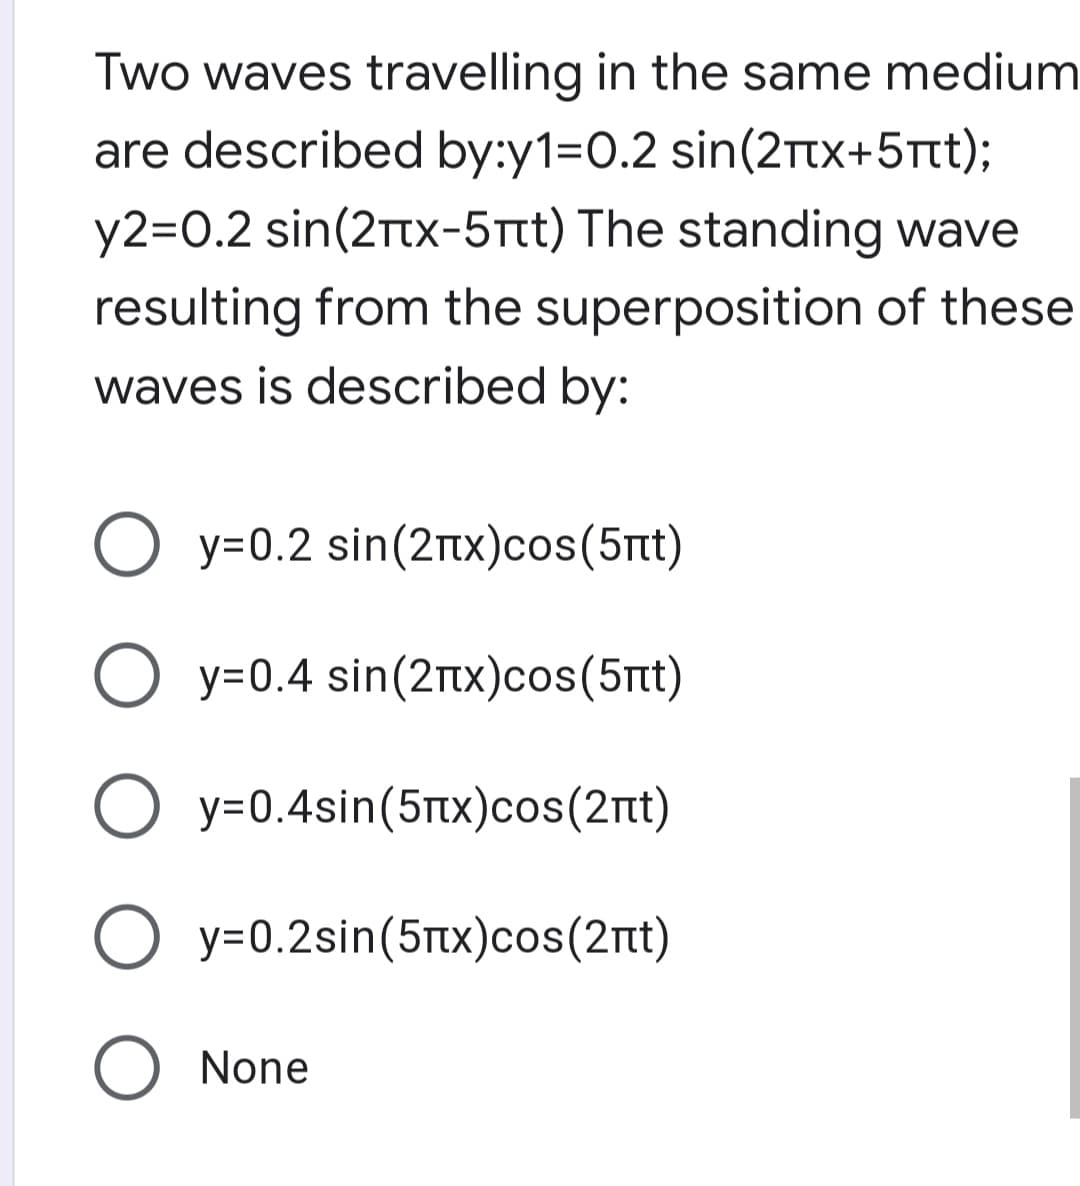 Two waves travelling in the same medium
are described by:y1=0.2 sin(2ttx+5Ttt);
y2=0.2 sin(2Ttx-5Ttt) The standing wave
resulting from the superposition of these
waves is described by:
Ο y-0.2 sin(2πx)cos(5πι)
O y=0.4 sin(2nX)cos(5rt)
O y=0.4sin(5tx)cos(2nt)
Ο y-0.2sin(5πχ)cos(2πι)
O None
